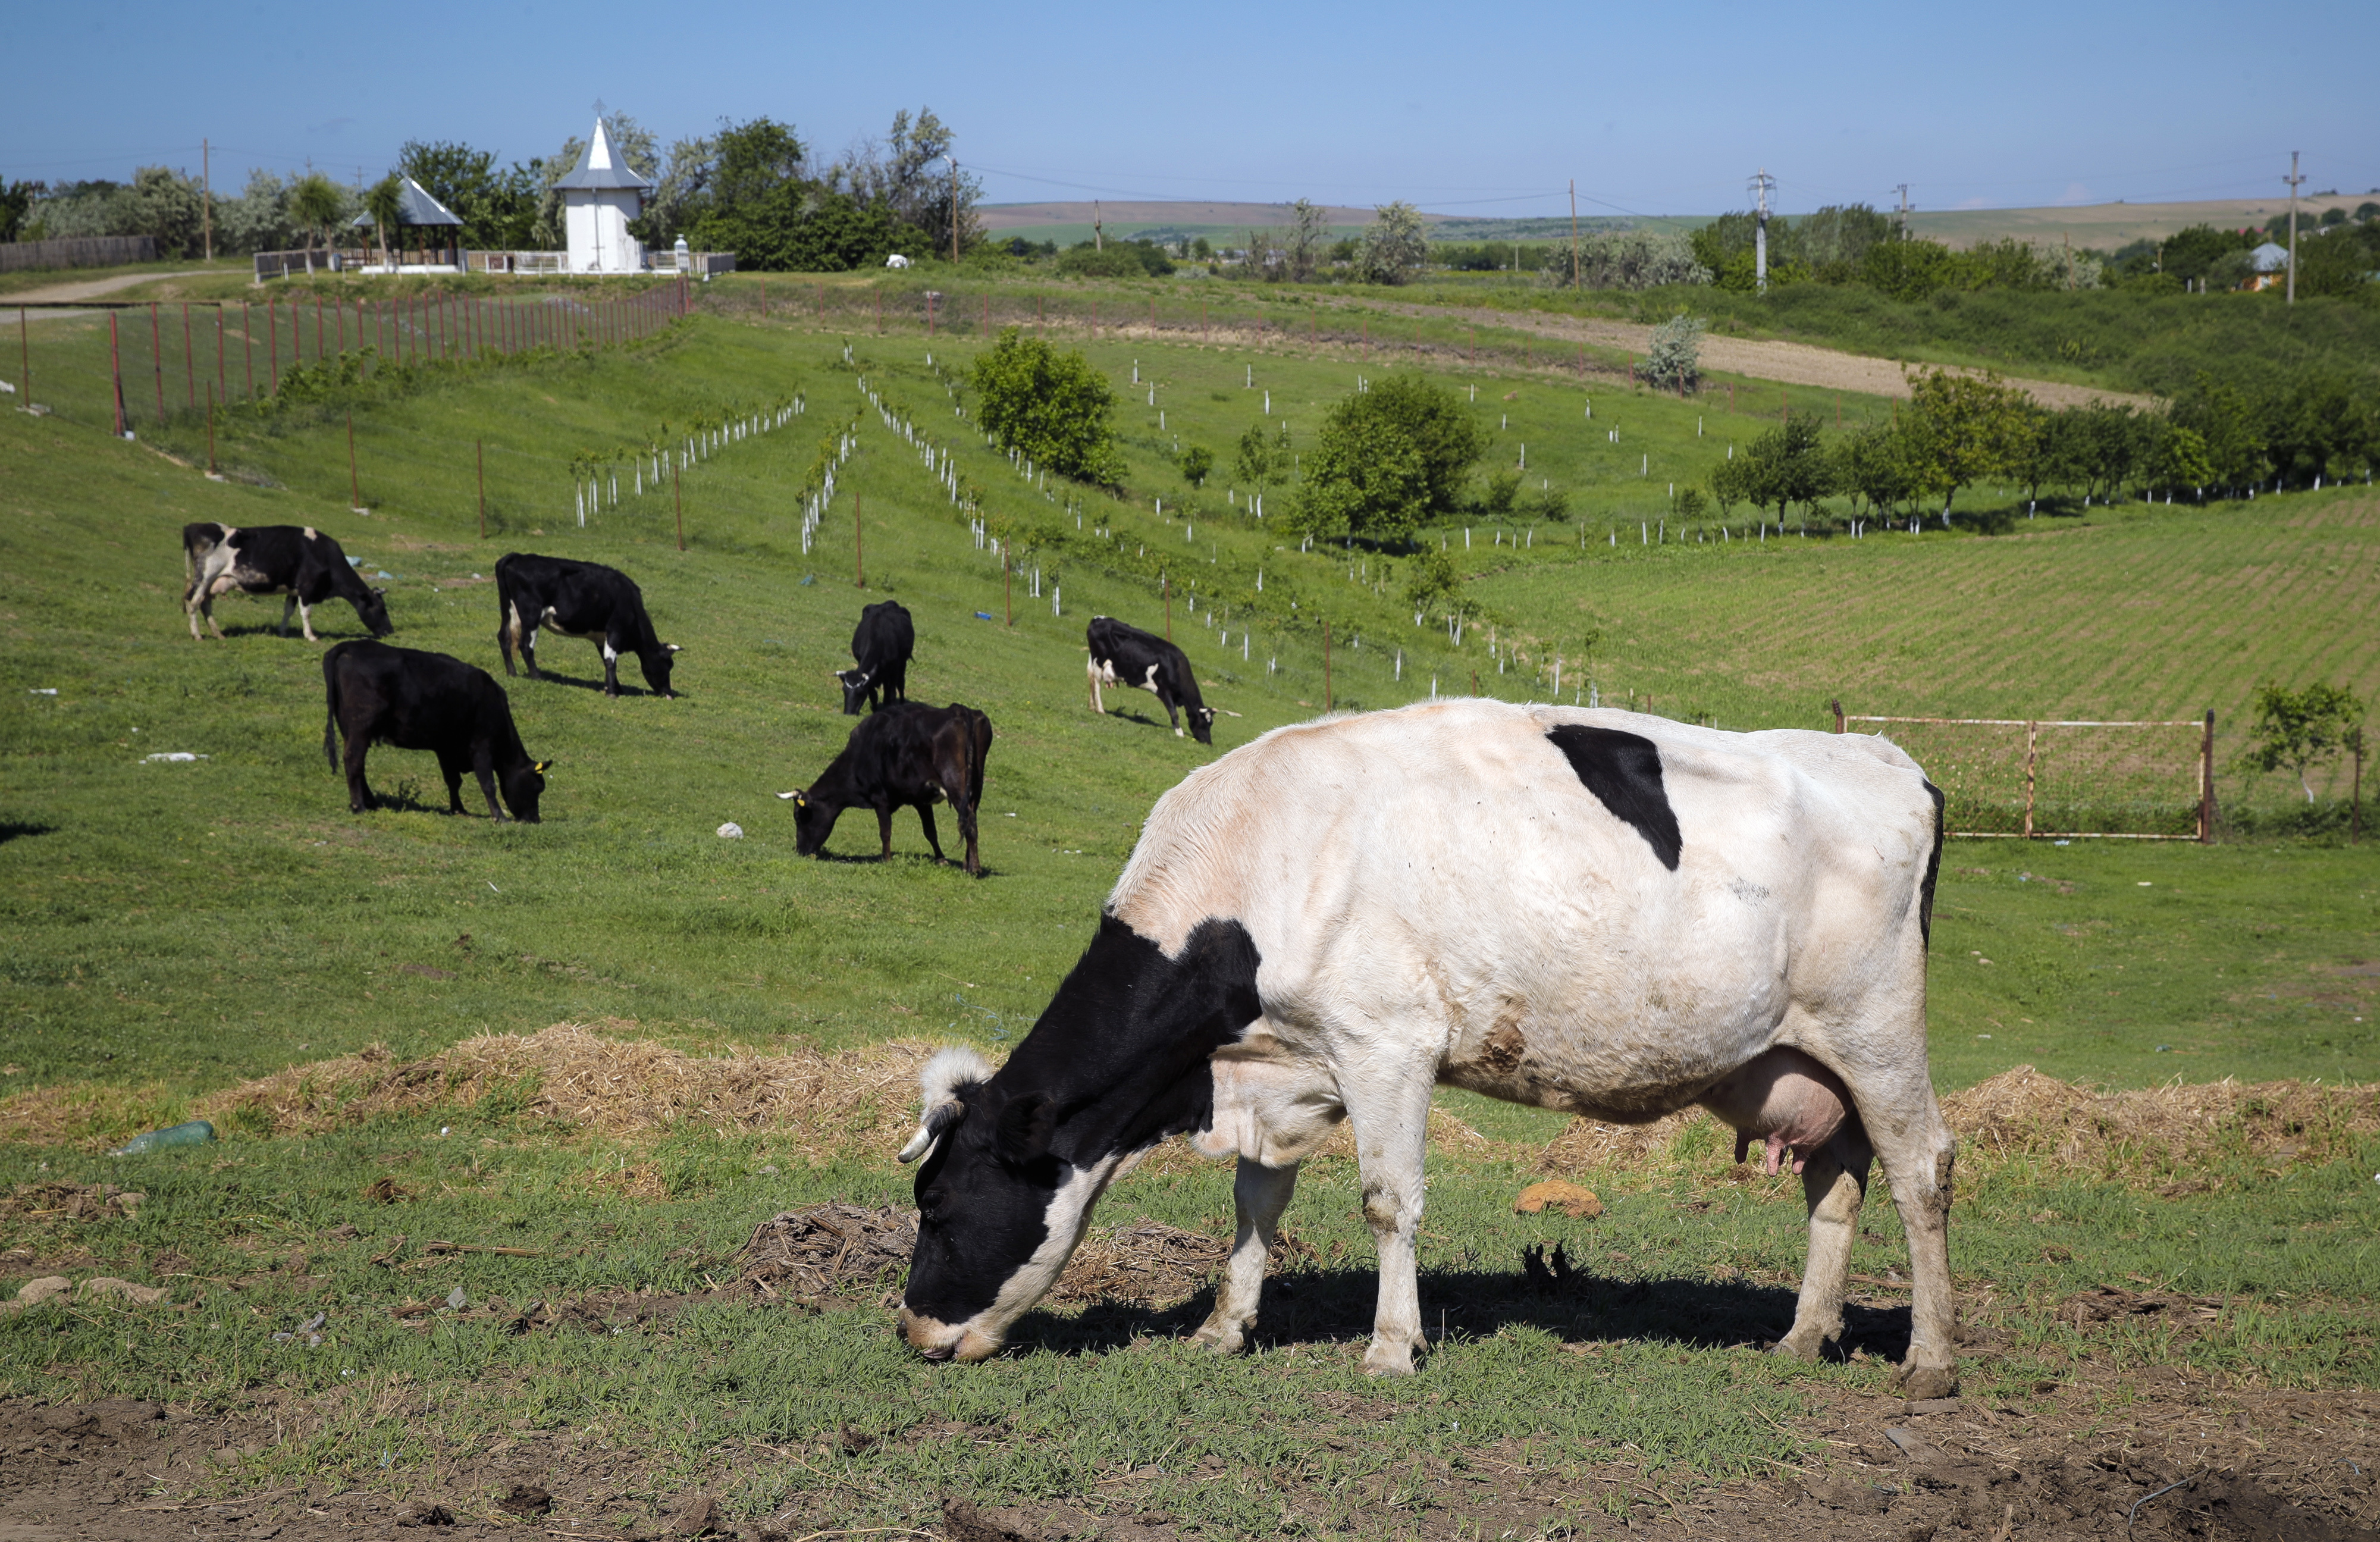 FILE - Cows graze in a field in Luncavita, Romania, on May 21, 2019. Denmark will impose cattle farmers with a tax on livestock carbon dioxide emissions from 2030, claiming it will be the first country to do so, in a move to reduce greenhouse gas emissions from each of their cows. (AP Photo/Vadim Ghirda, File)